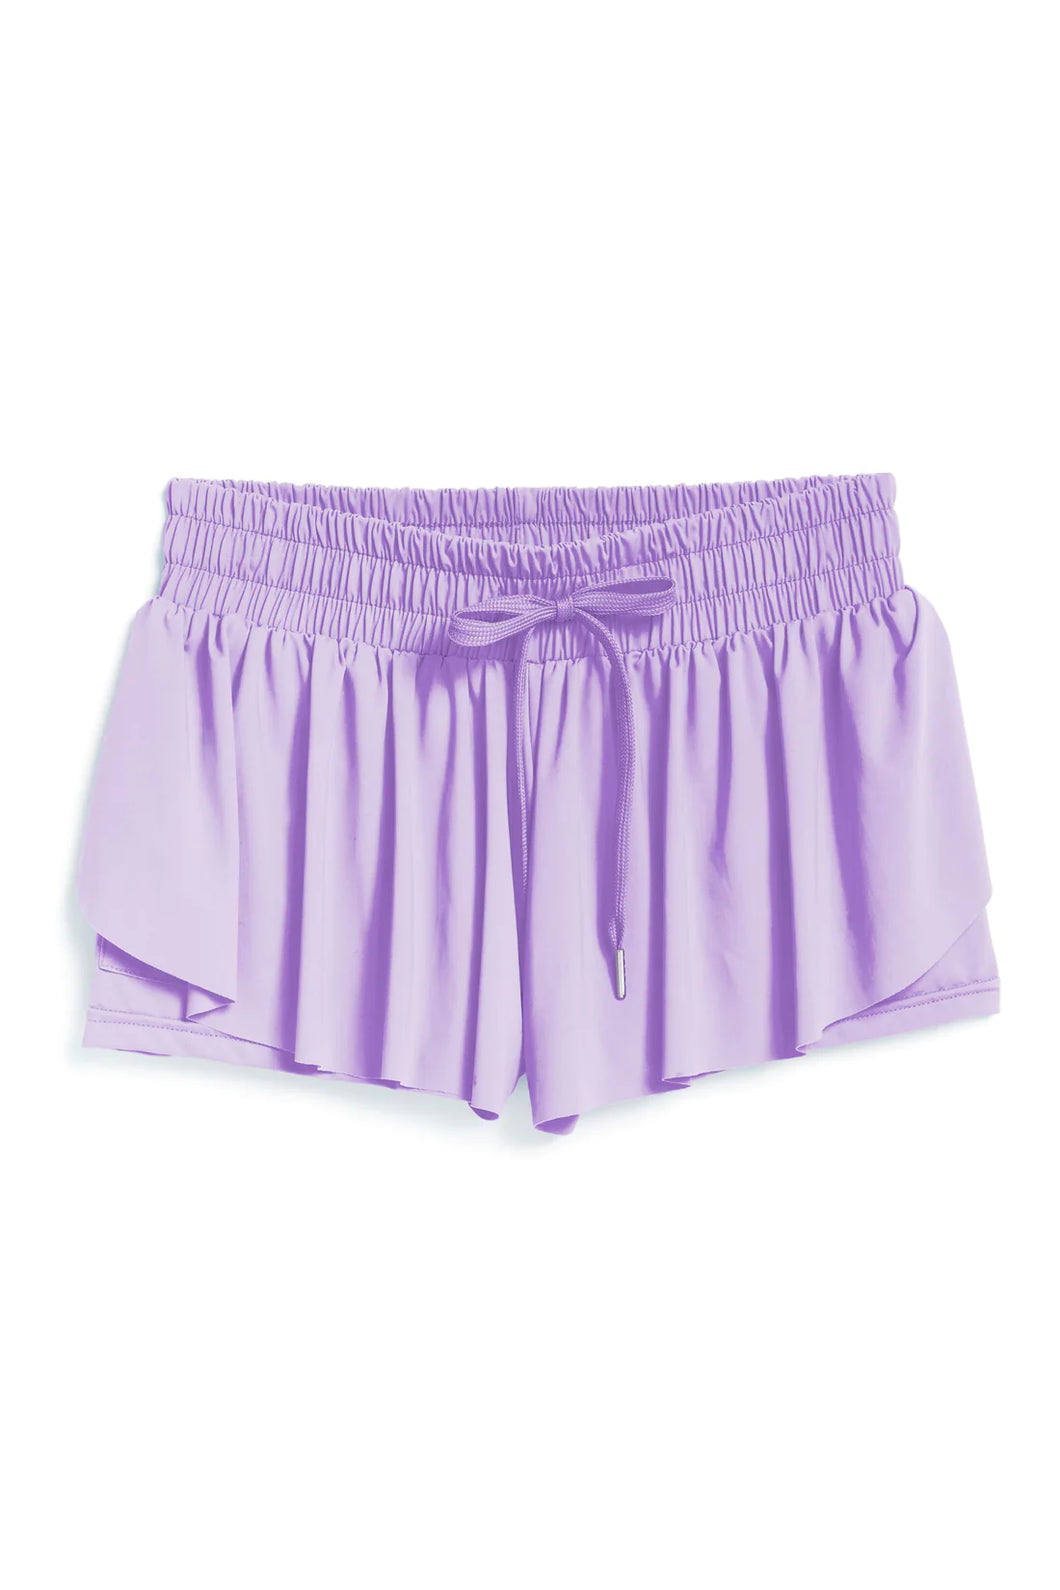 Tractr Butterly Shorts Lilac